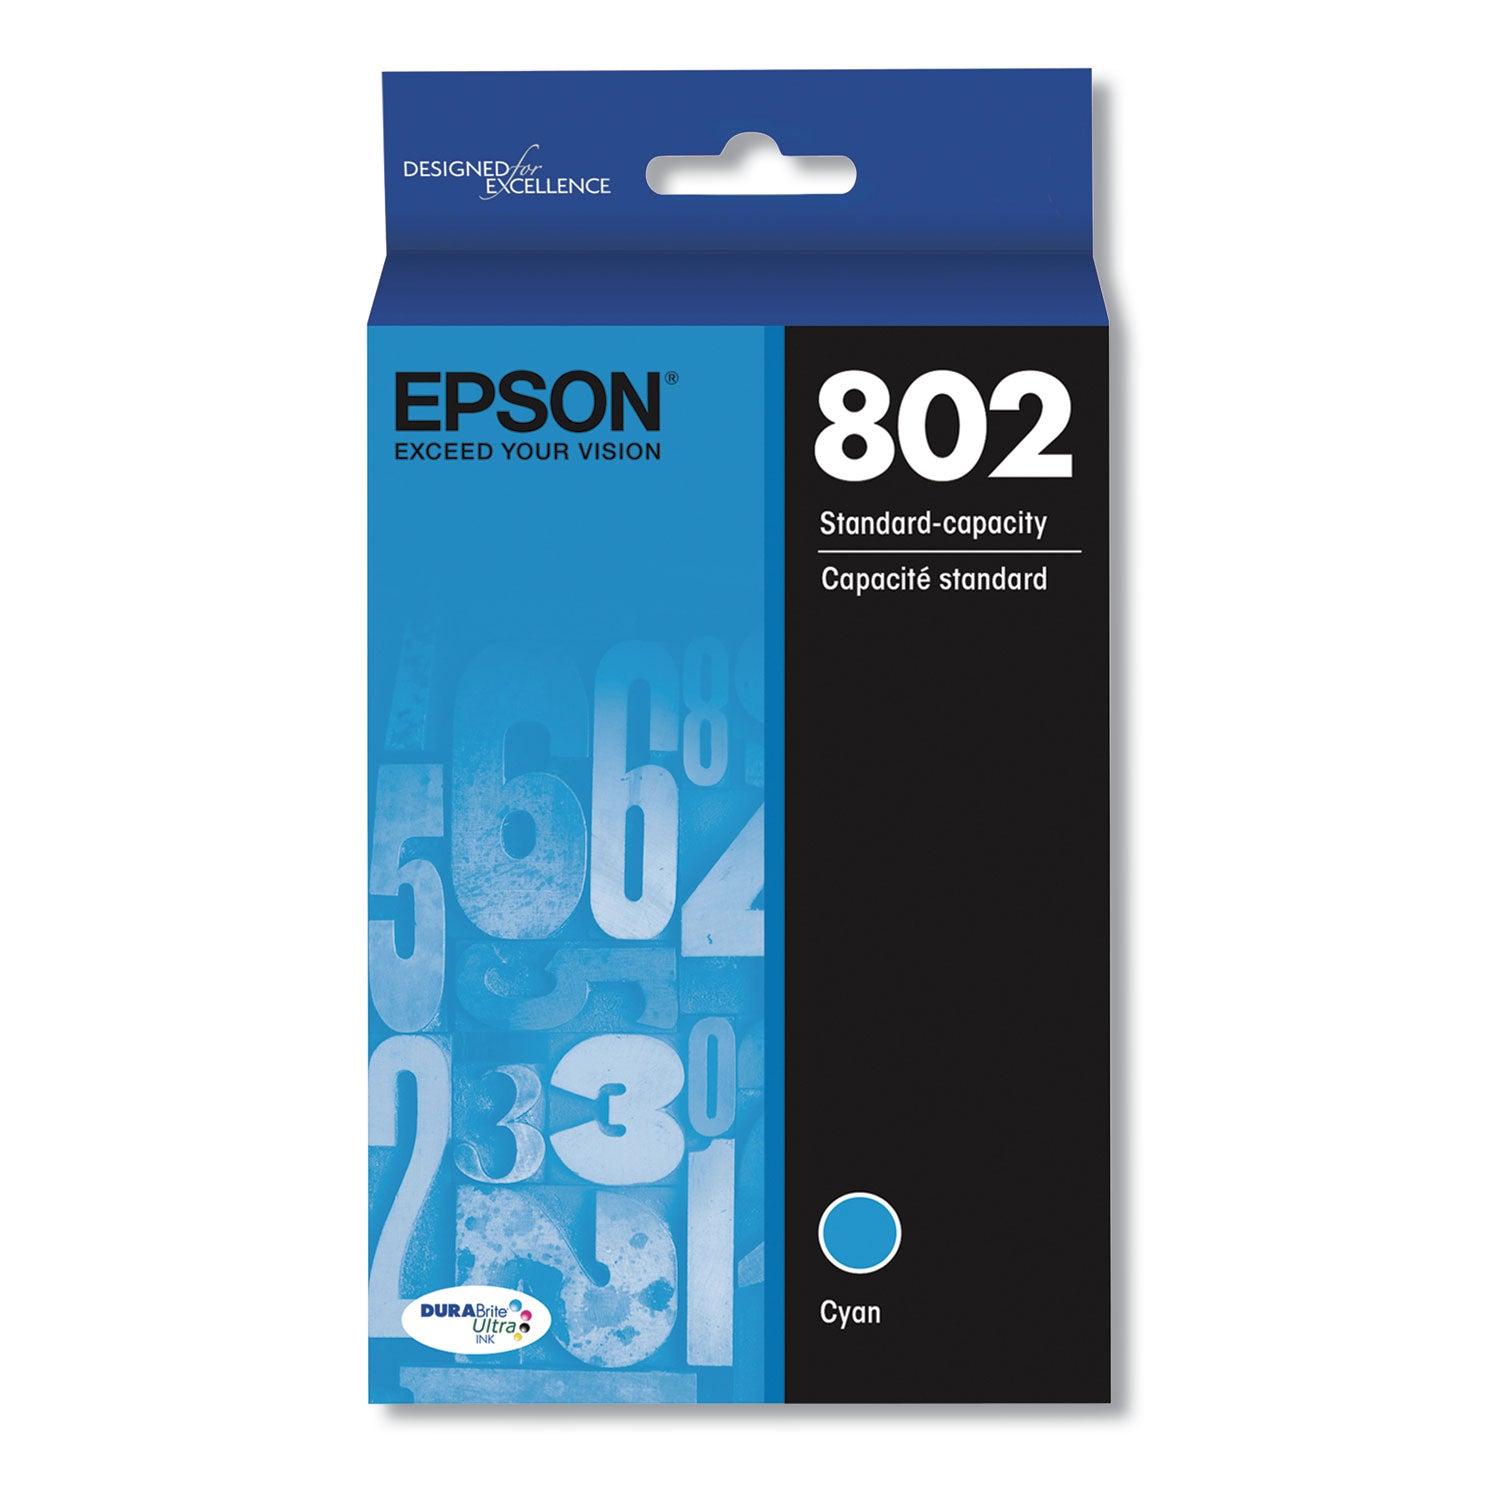 t802220-s-802-durabrite-ultra-ink-650-page-yield-cyan_epst802220s - 1